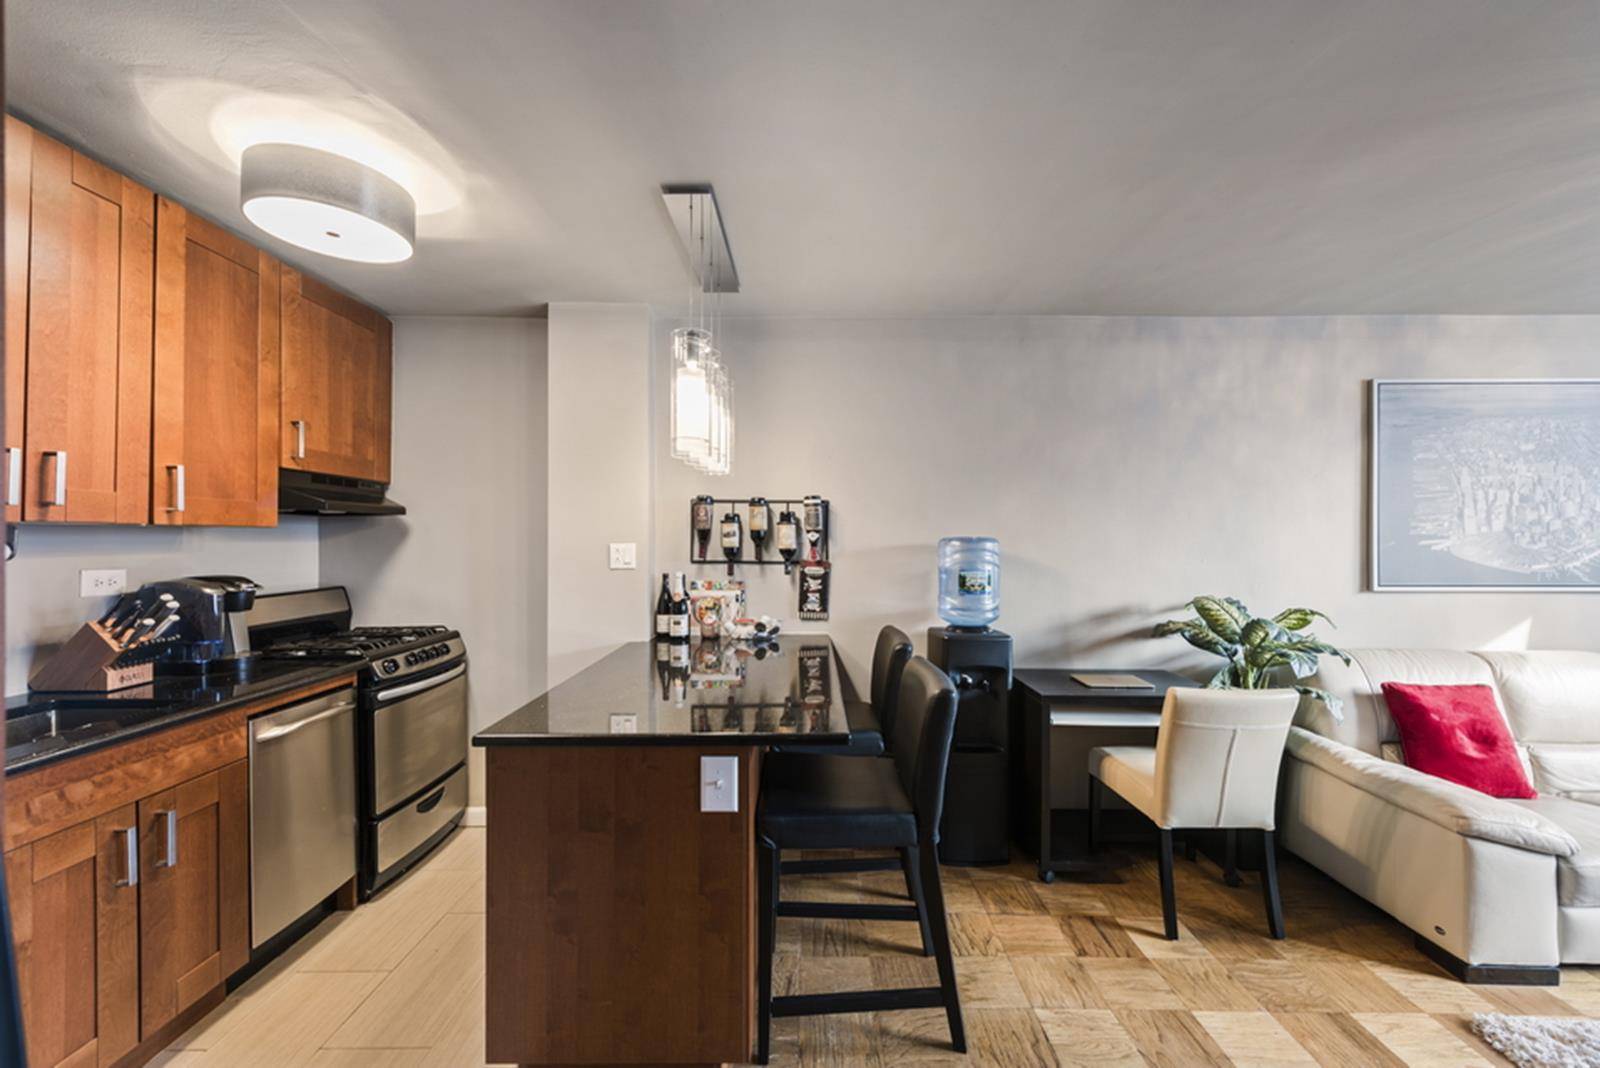 Beautiful 1 bedroom a few blocks from the East River, tennis and basketball courts.